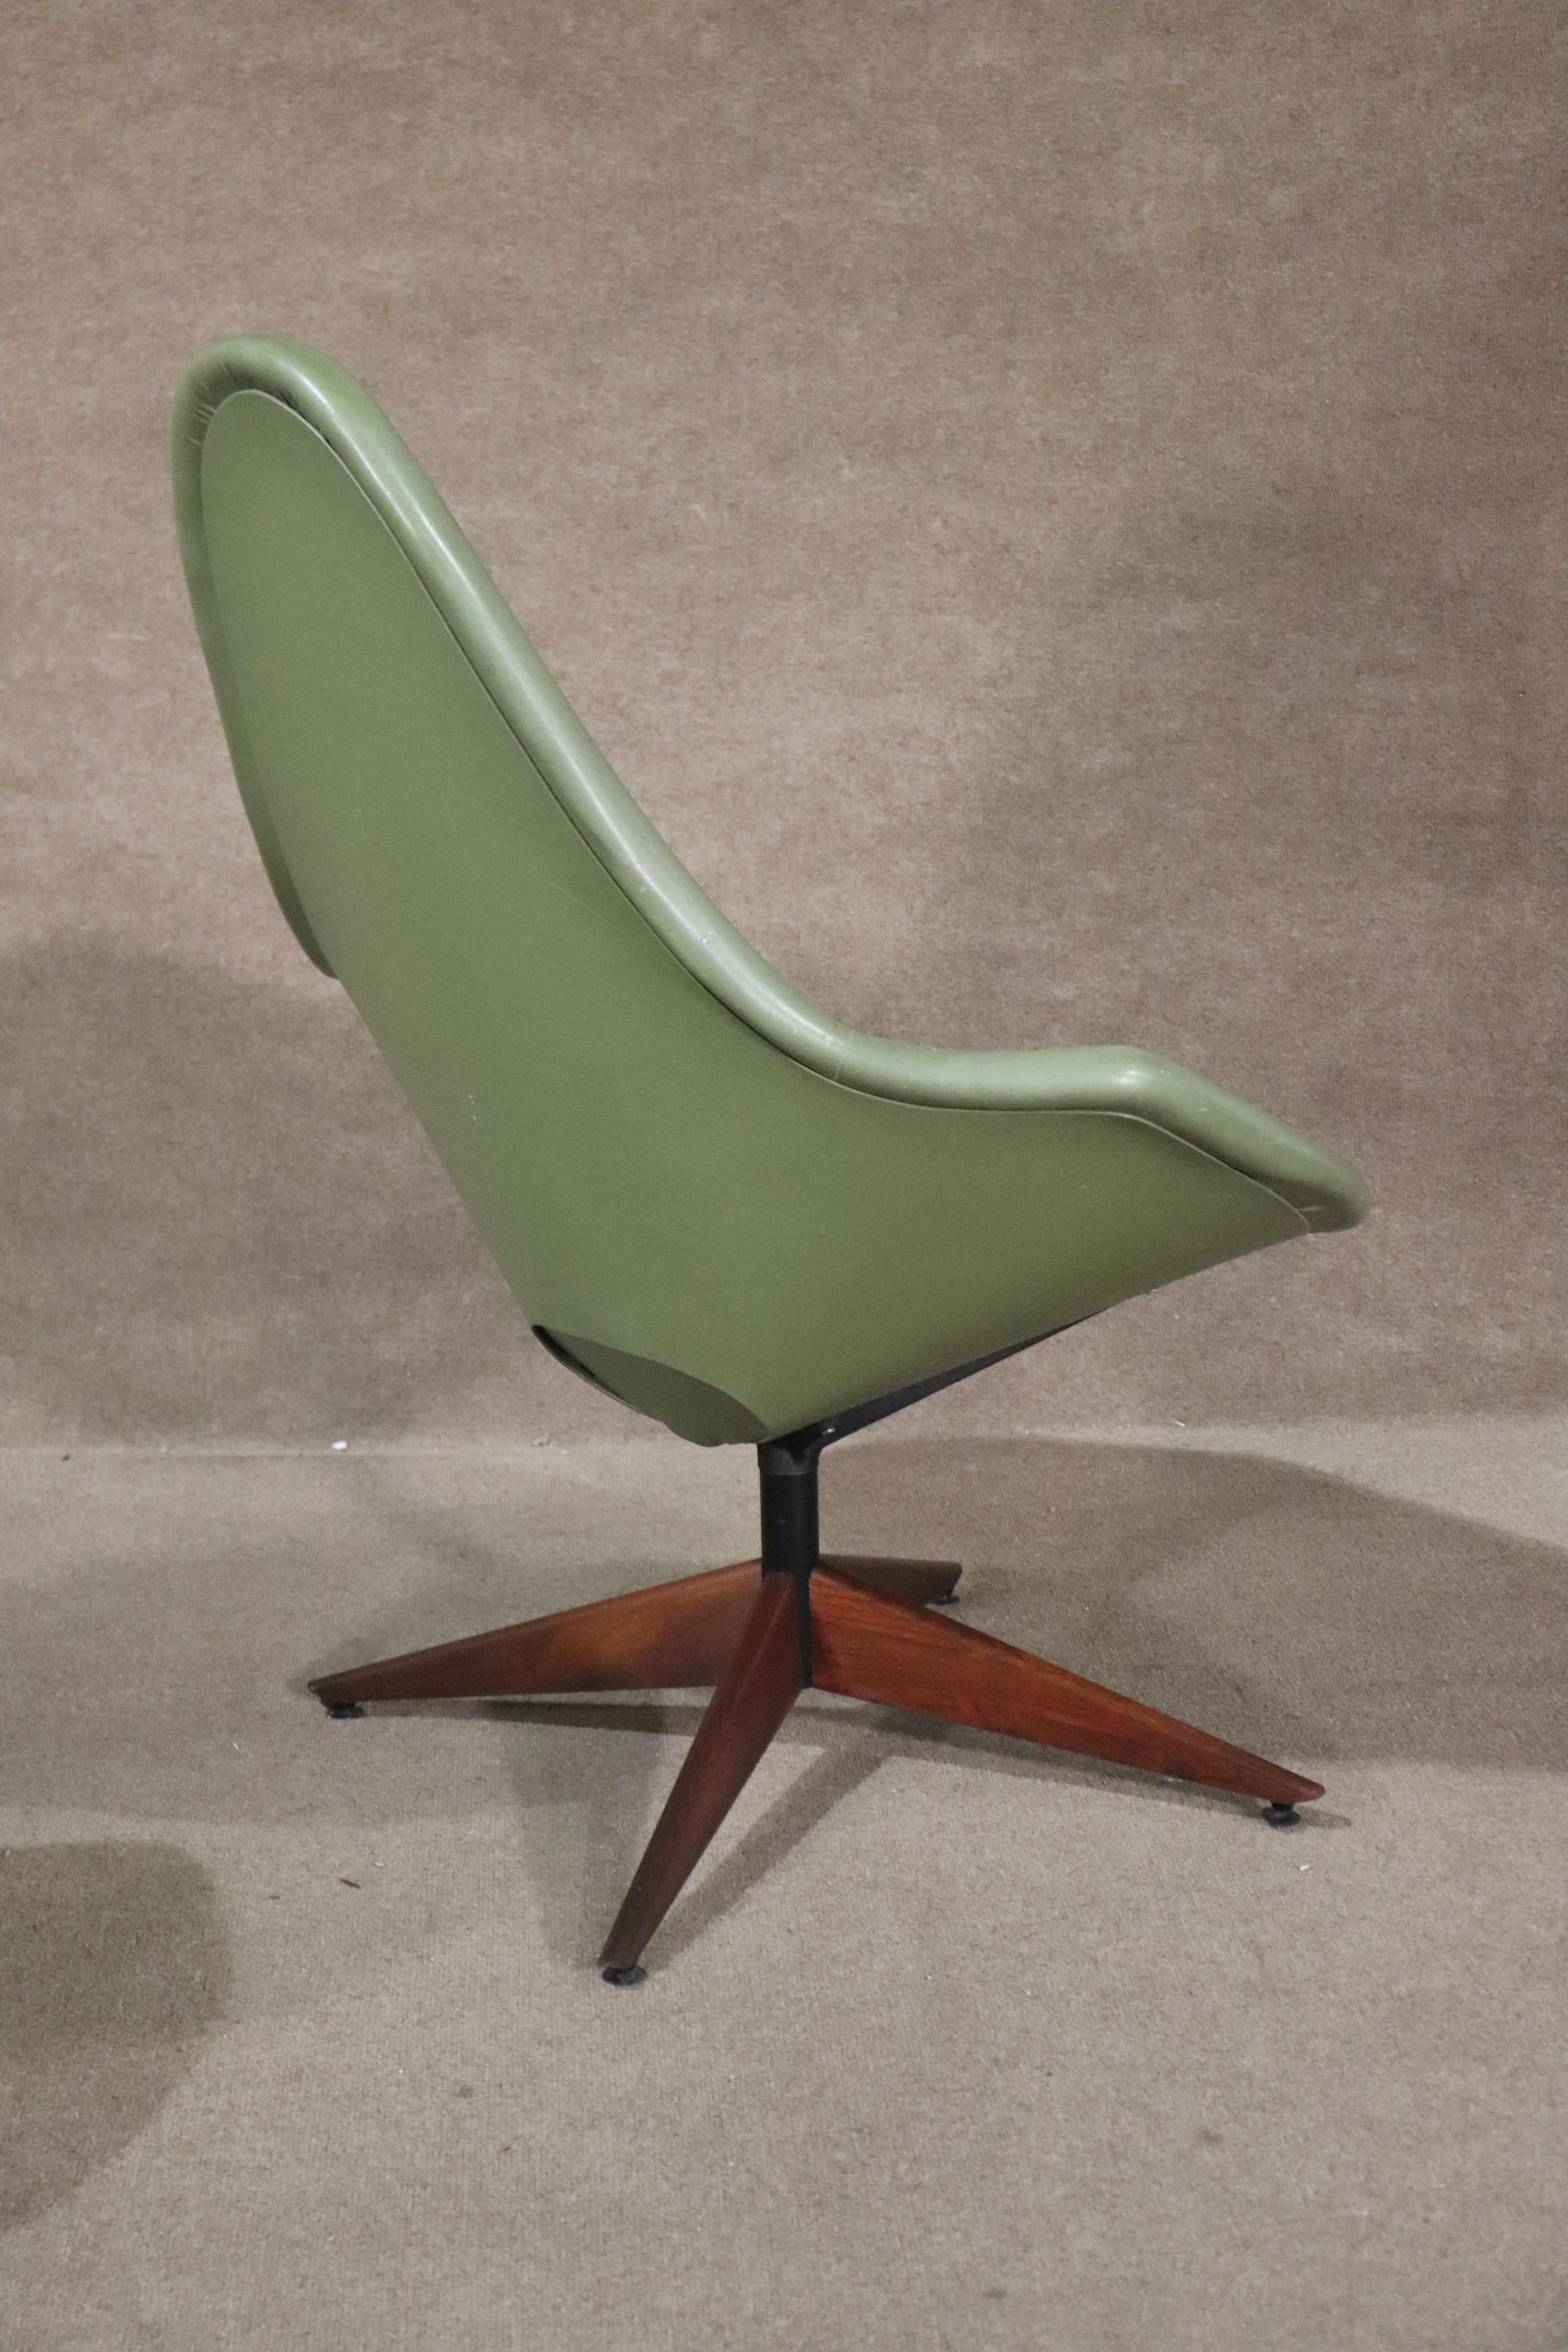 Mid-century modern swivel chair by John Yellin for IV Chair Corp. Fun 1960s atomic age style form chair with footstool.
Please confirm location NY or NJ